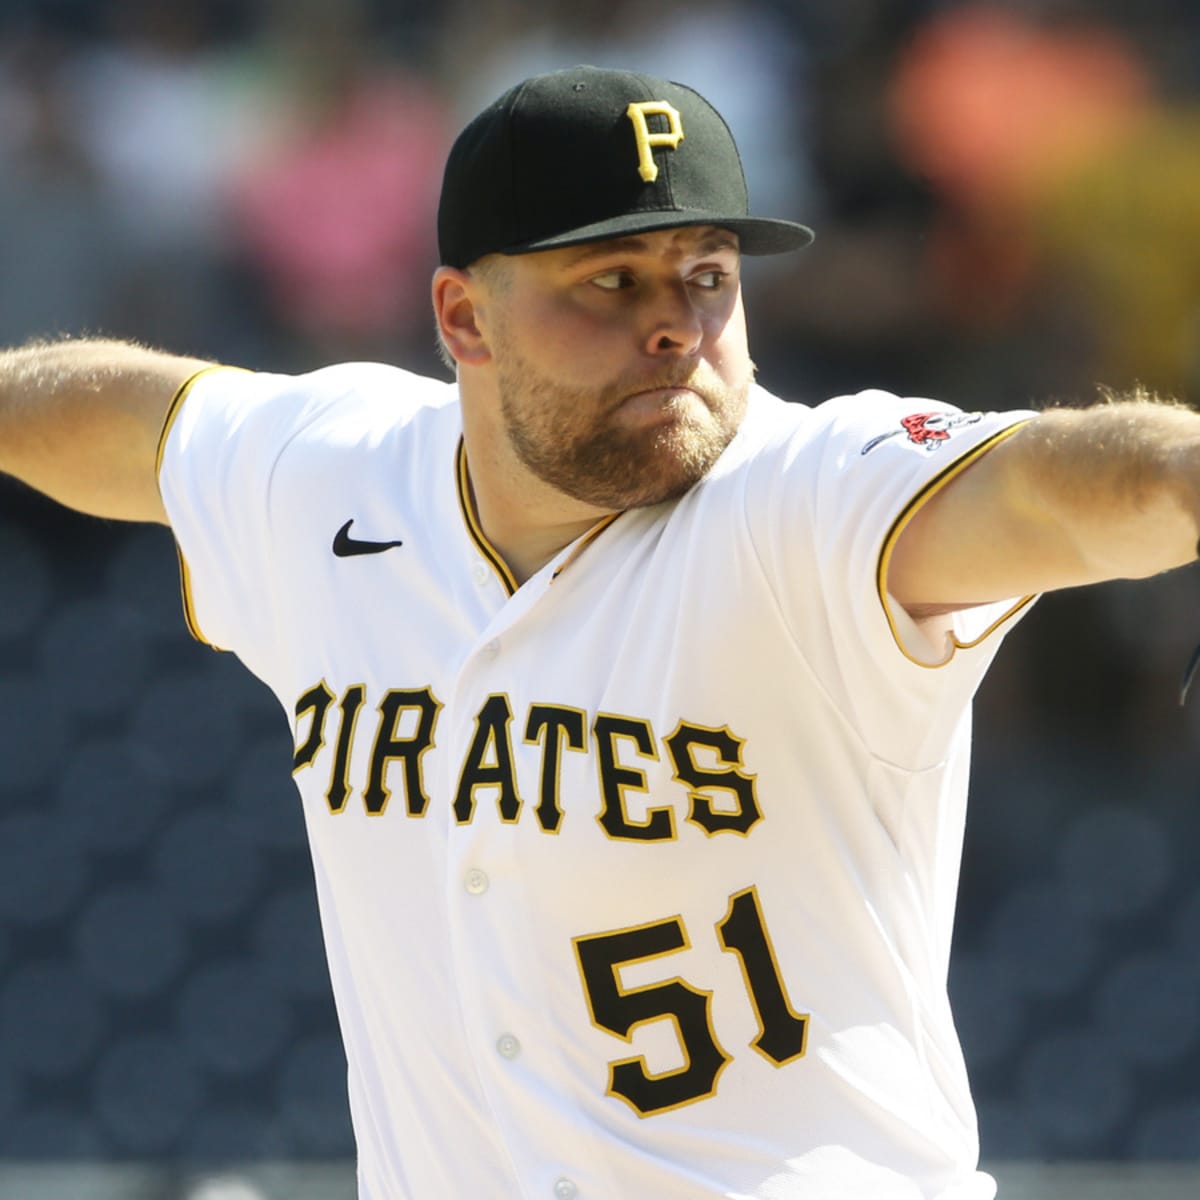 Covid-19 shutdown gave Pirates pitcher Clay Holmes time to